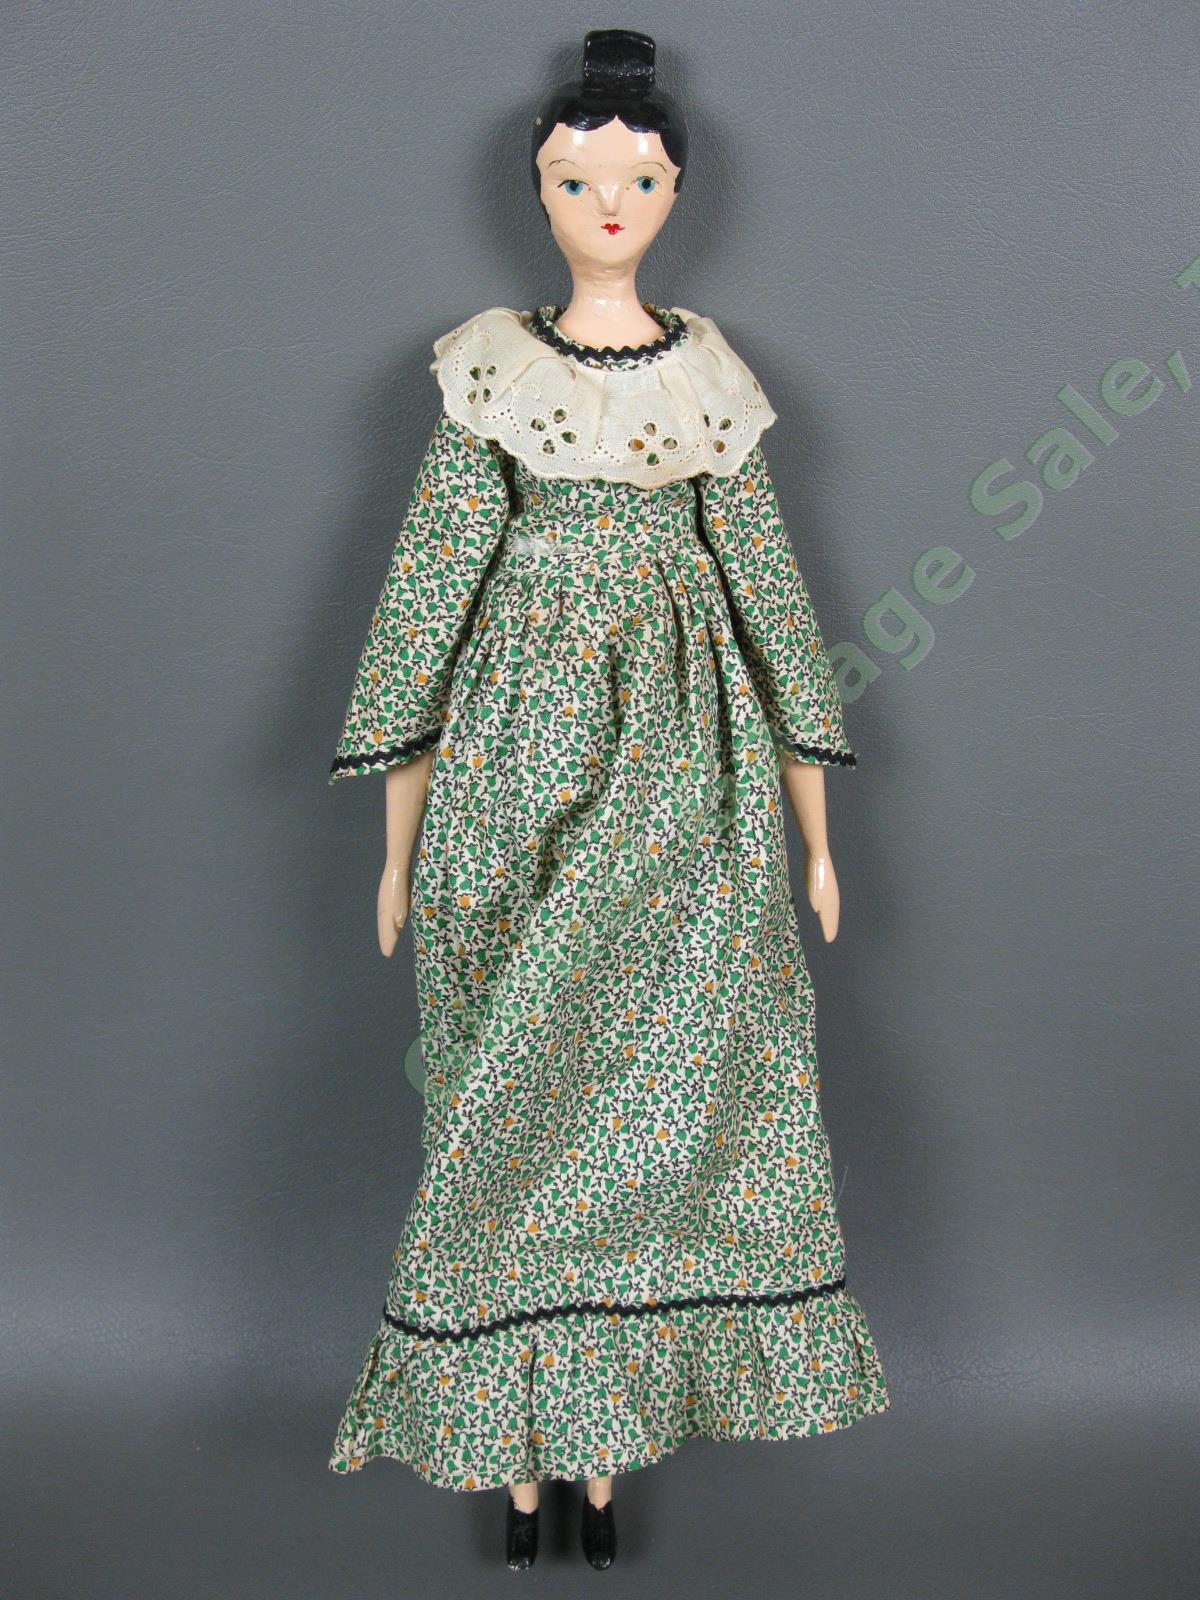 Antique Hand-Carved Wood Queen Anne Style 18" Wooden Companion Doll Figurine NR